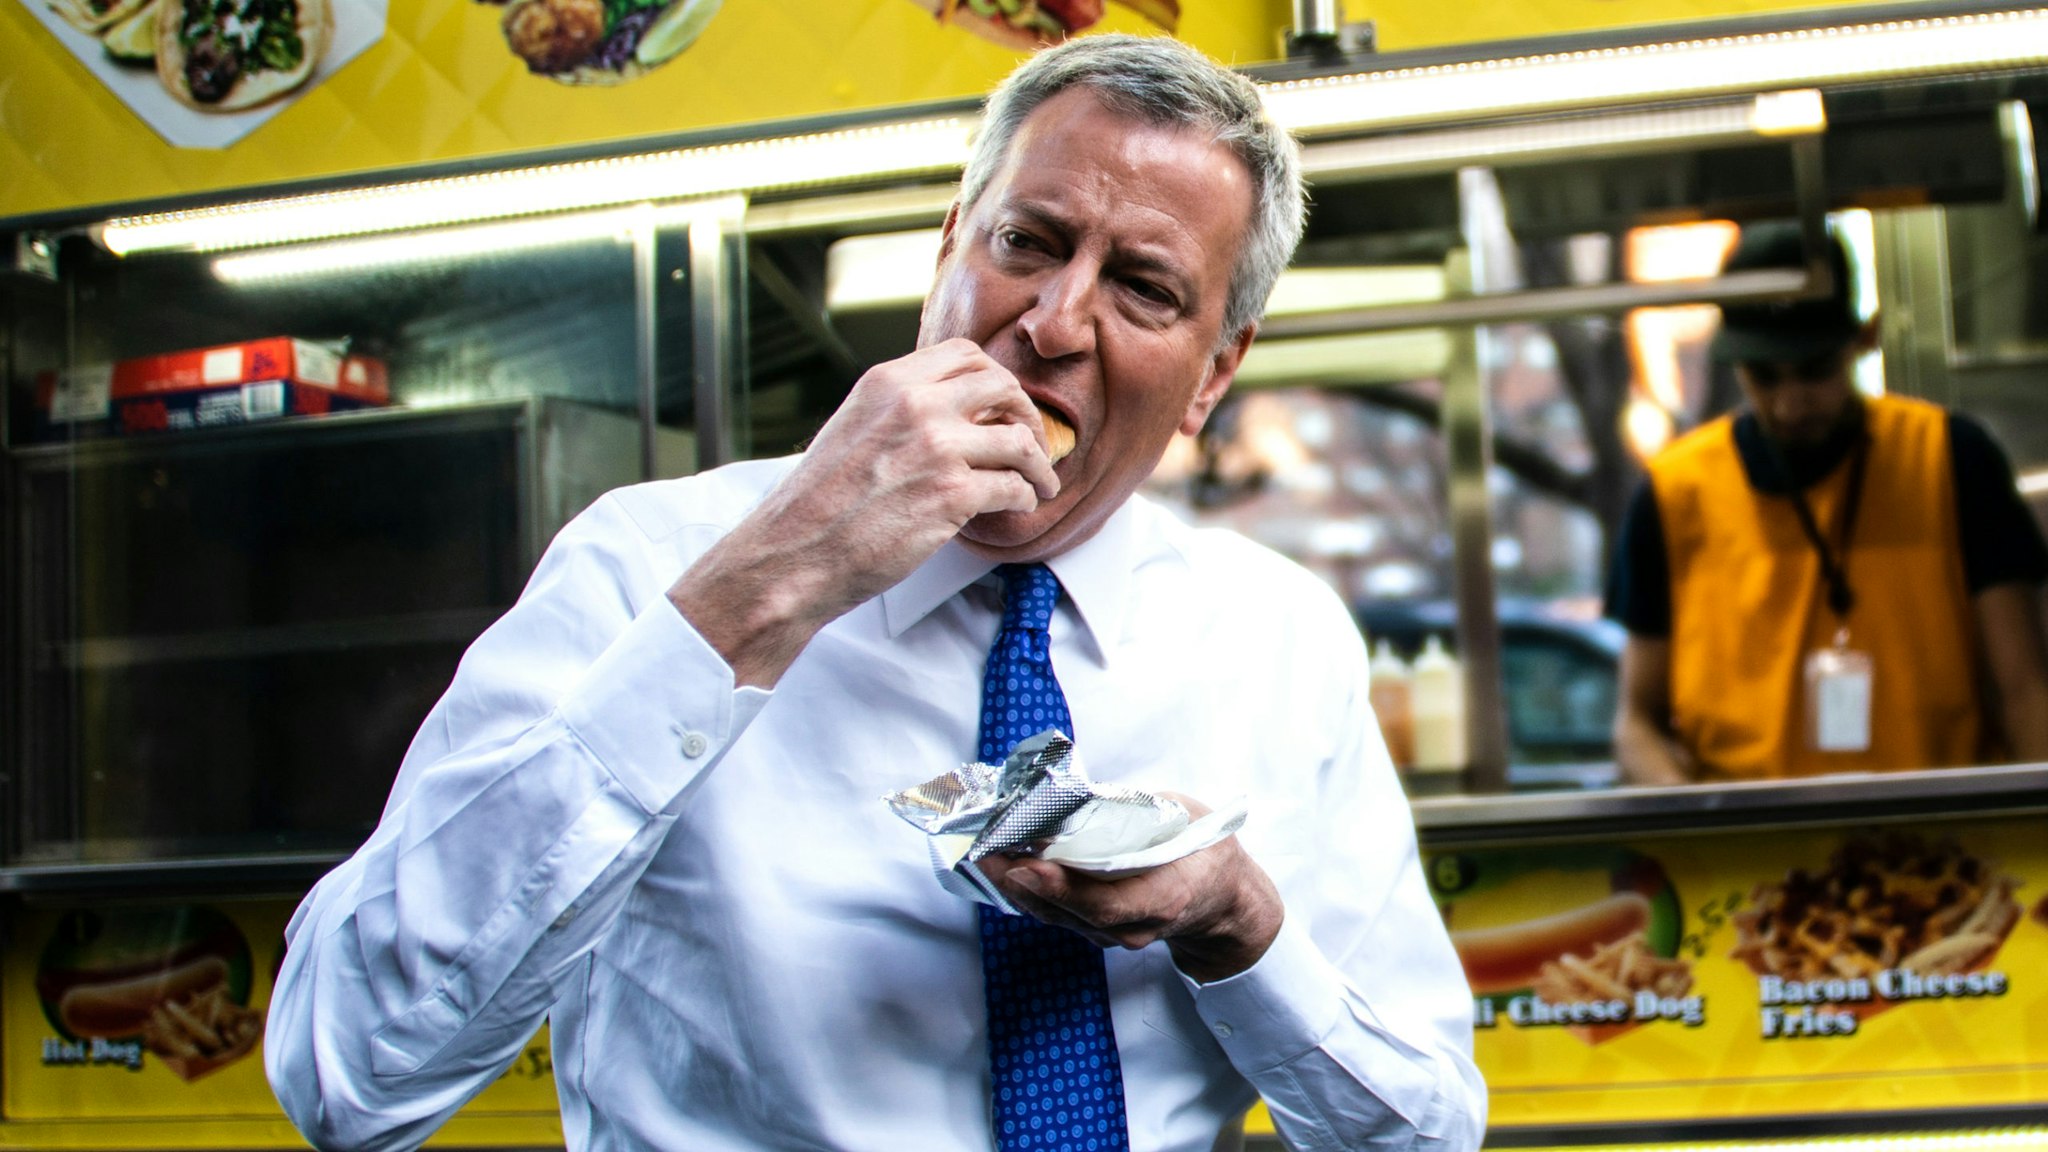 NEW YORK, NY - MARCH 09: New York Mayor Bill De Blasio eats a hot dog in Union Square to distribute information about the Coronavirus on March 9, 2020 in New York City. There are now 20 confirmed coronavirus cases in the city including a 7-year-old girl in the Bronx.